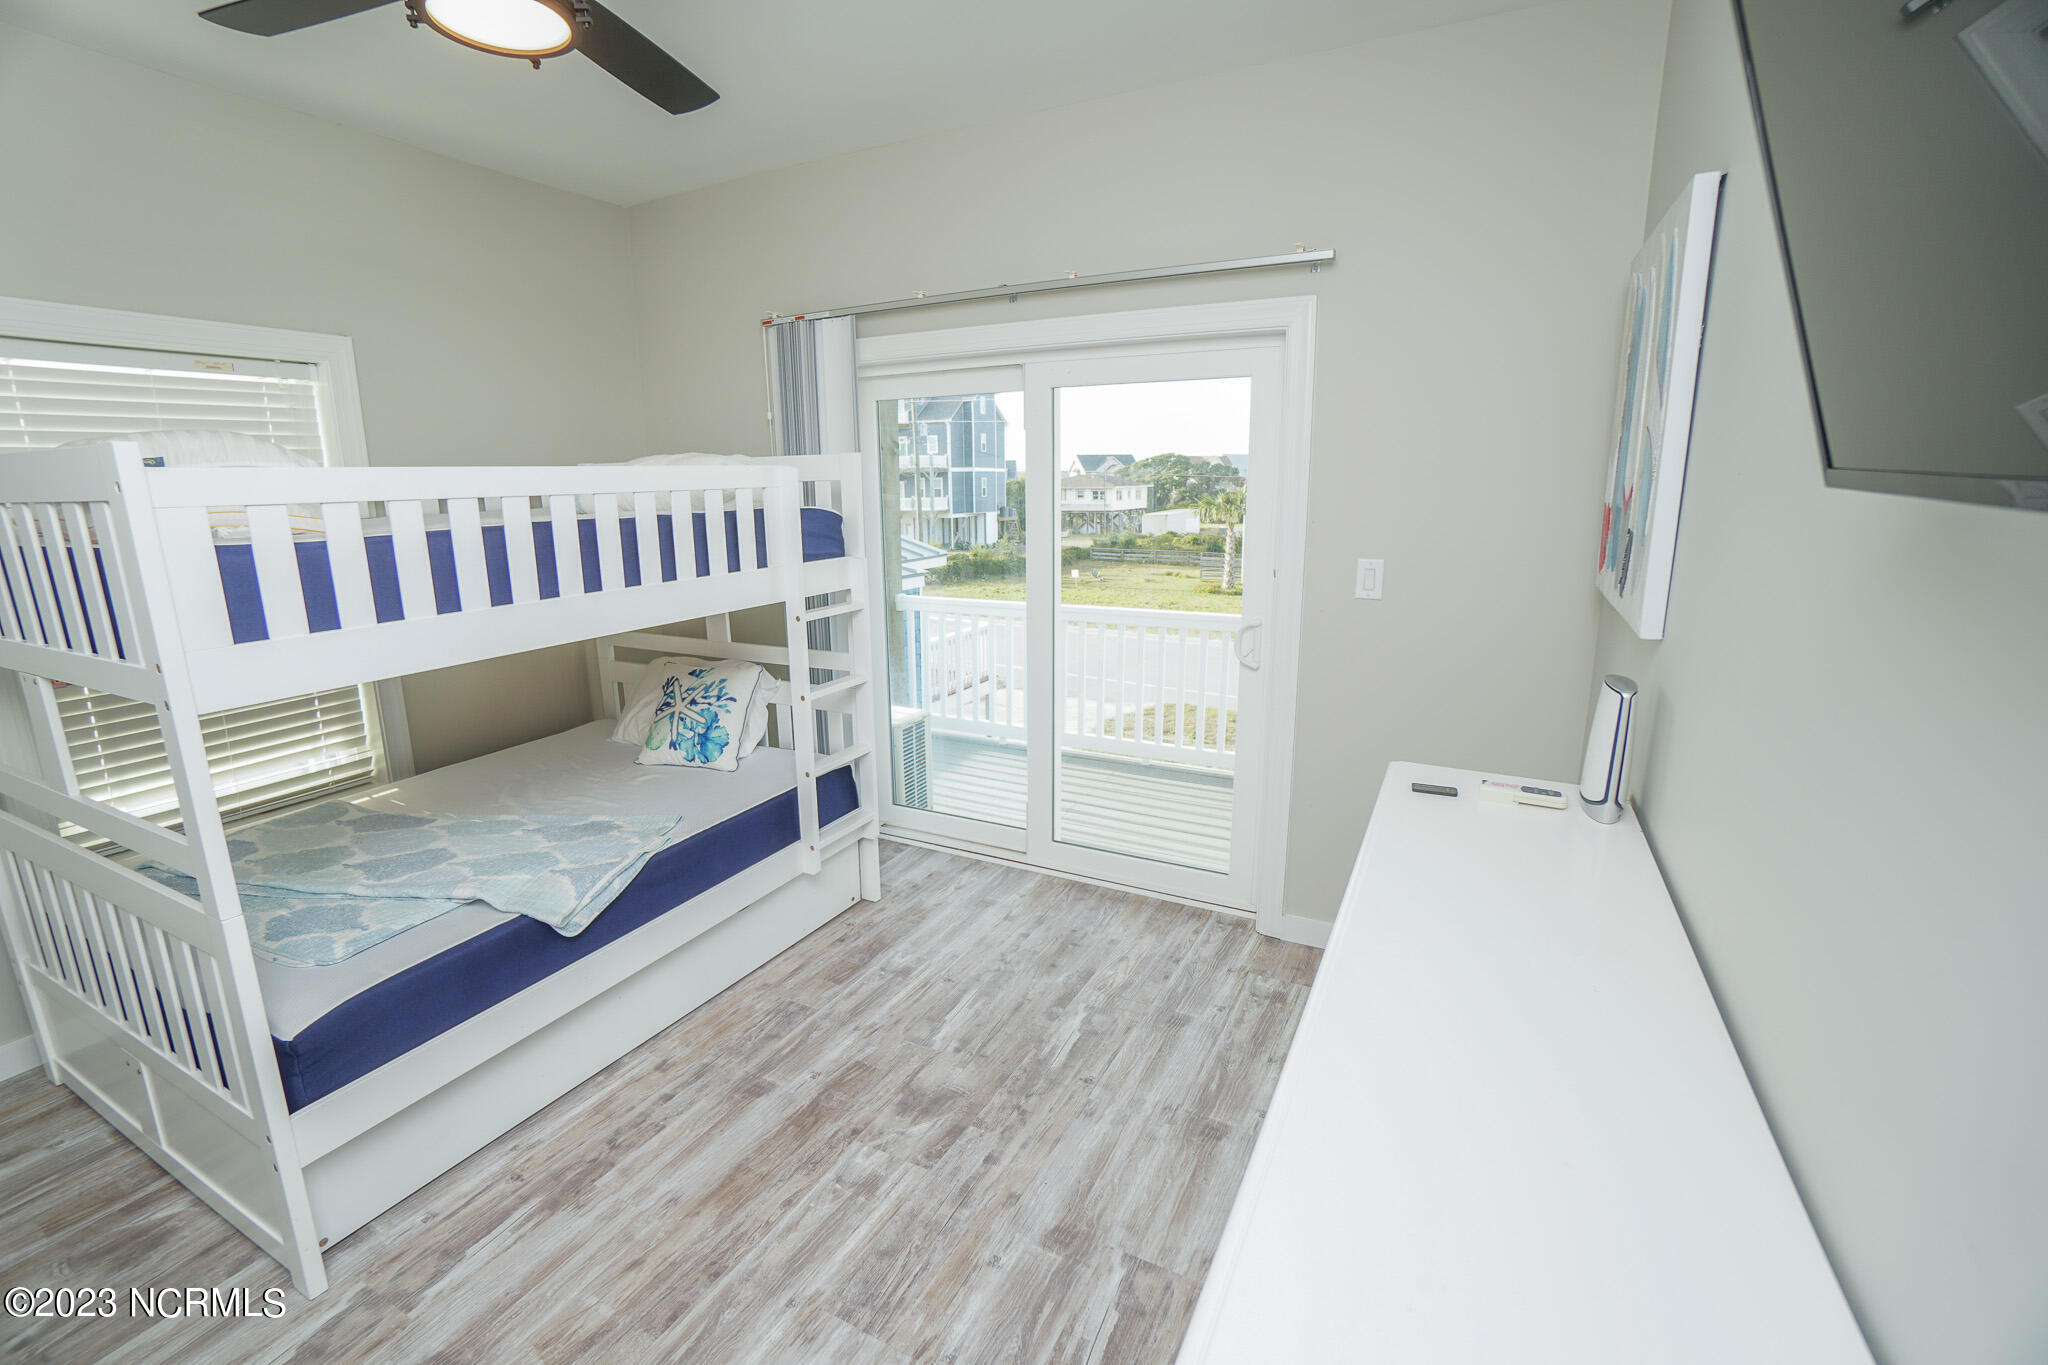 3200 Gray Street, North Topsail Beach, North Carolina, 28460, United States, 6 Bedrooms Bedrooms, ,5 BathroomsBathrooms,Residential,For Sale,3200 Gray Street,1433618